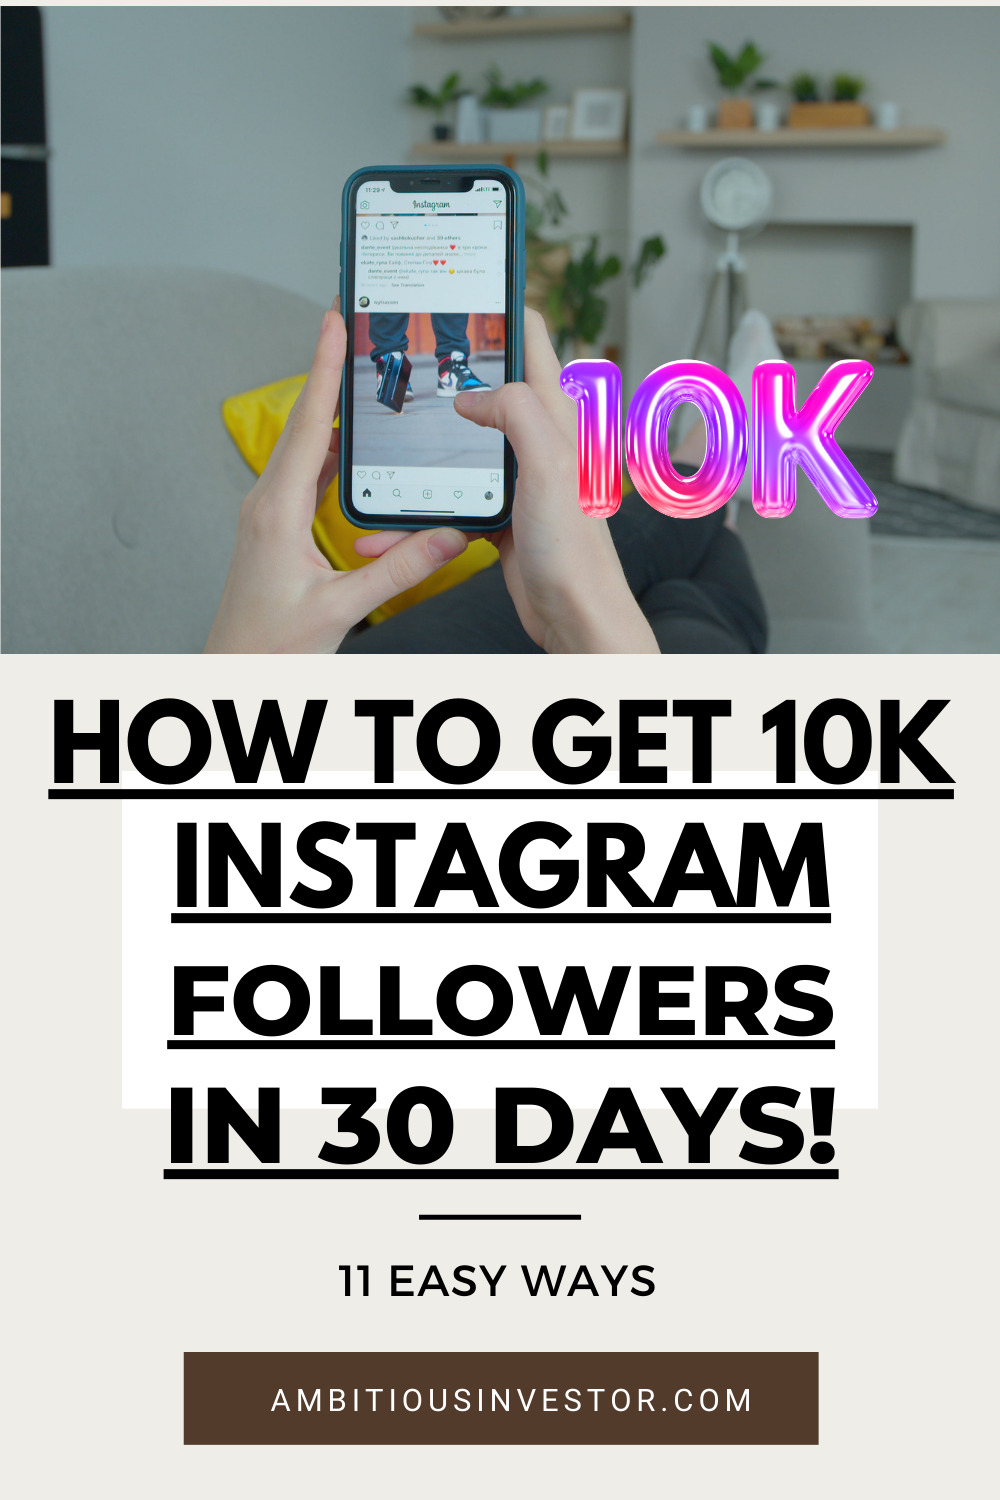 How to Get 10k Instagram Followers in 30 Days! 